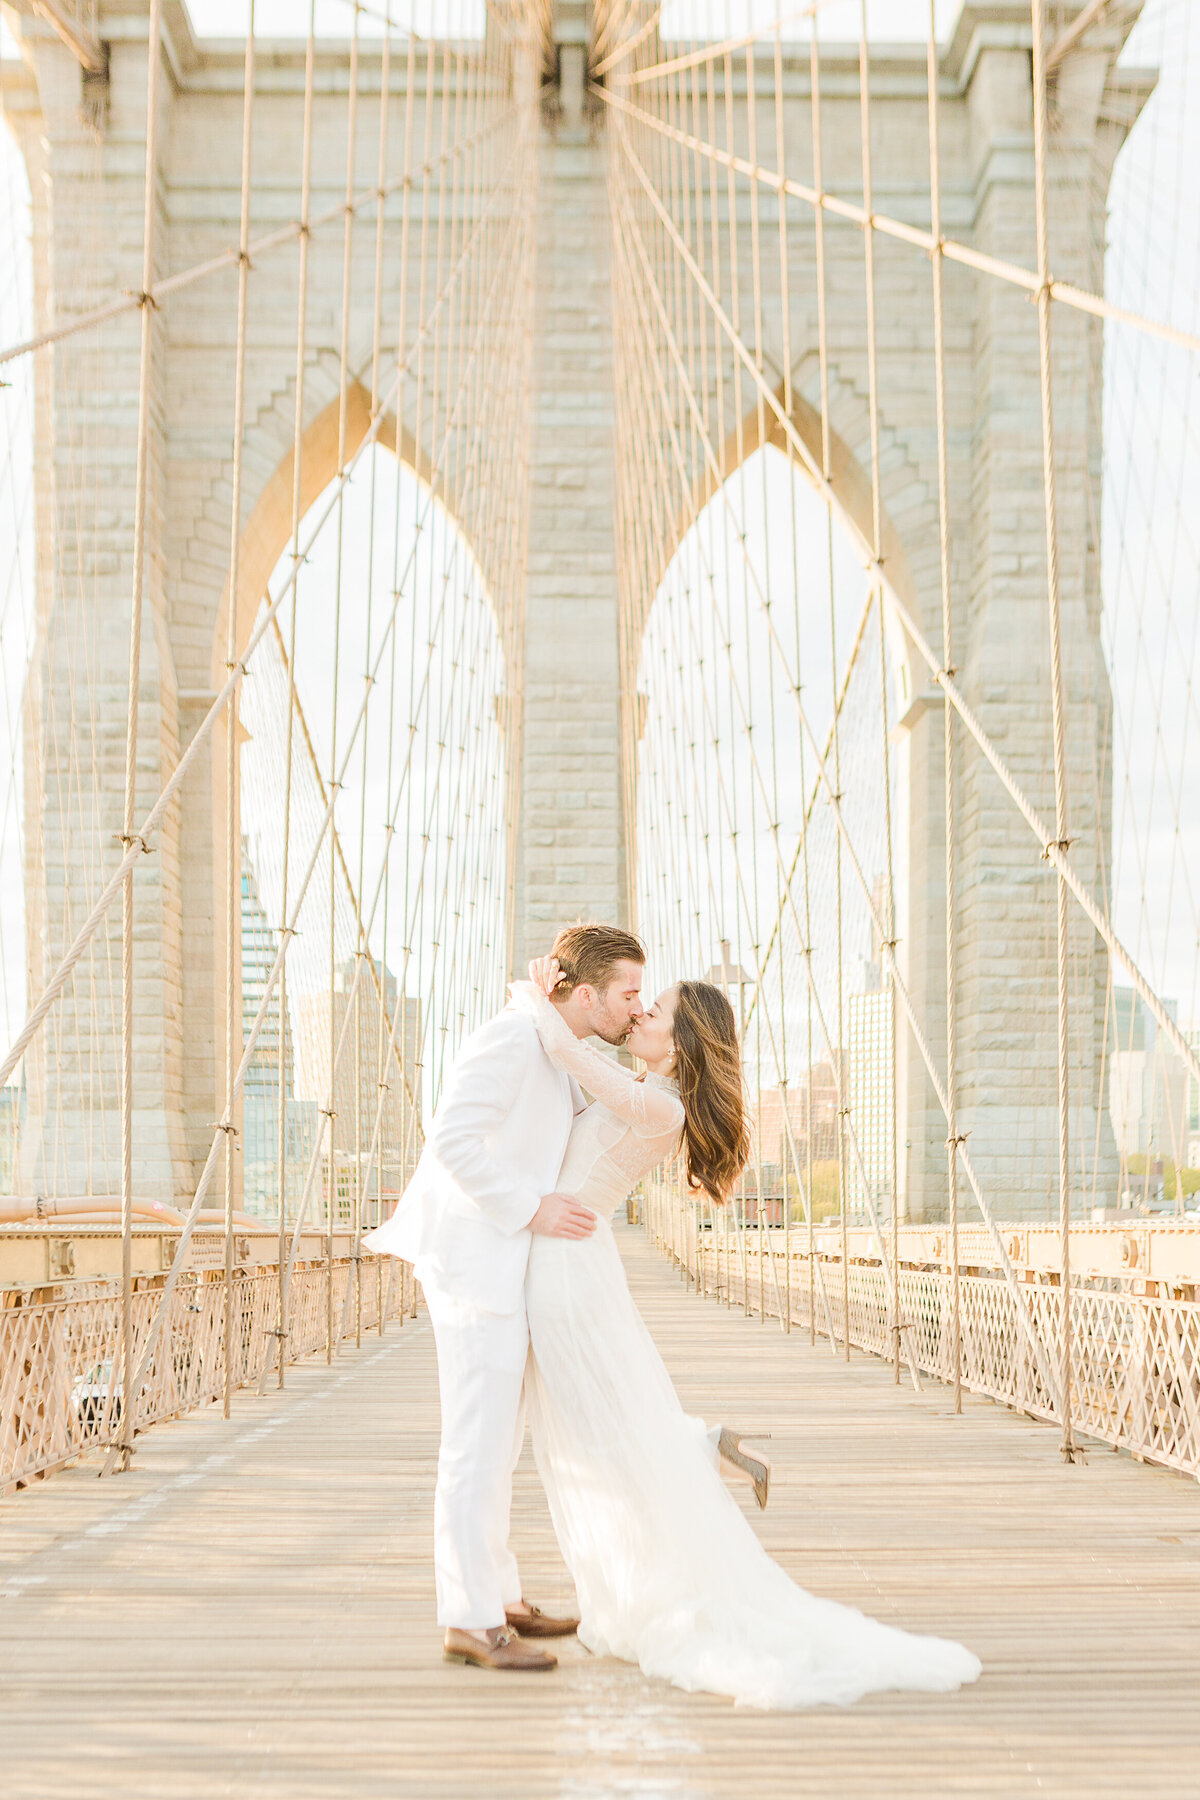 Bride and Groom pose for a photo on a pedestrian bridge with steel trusses.